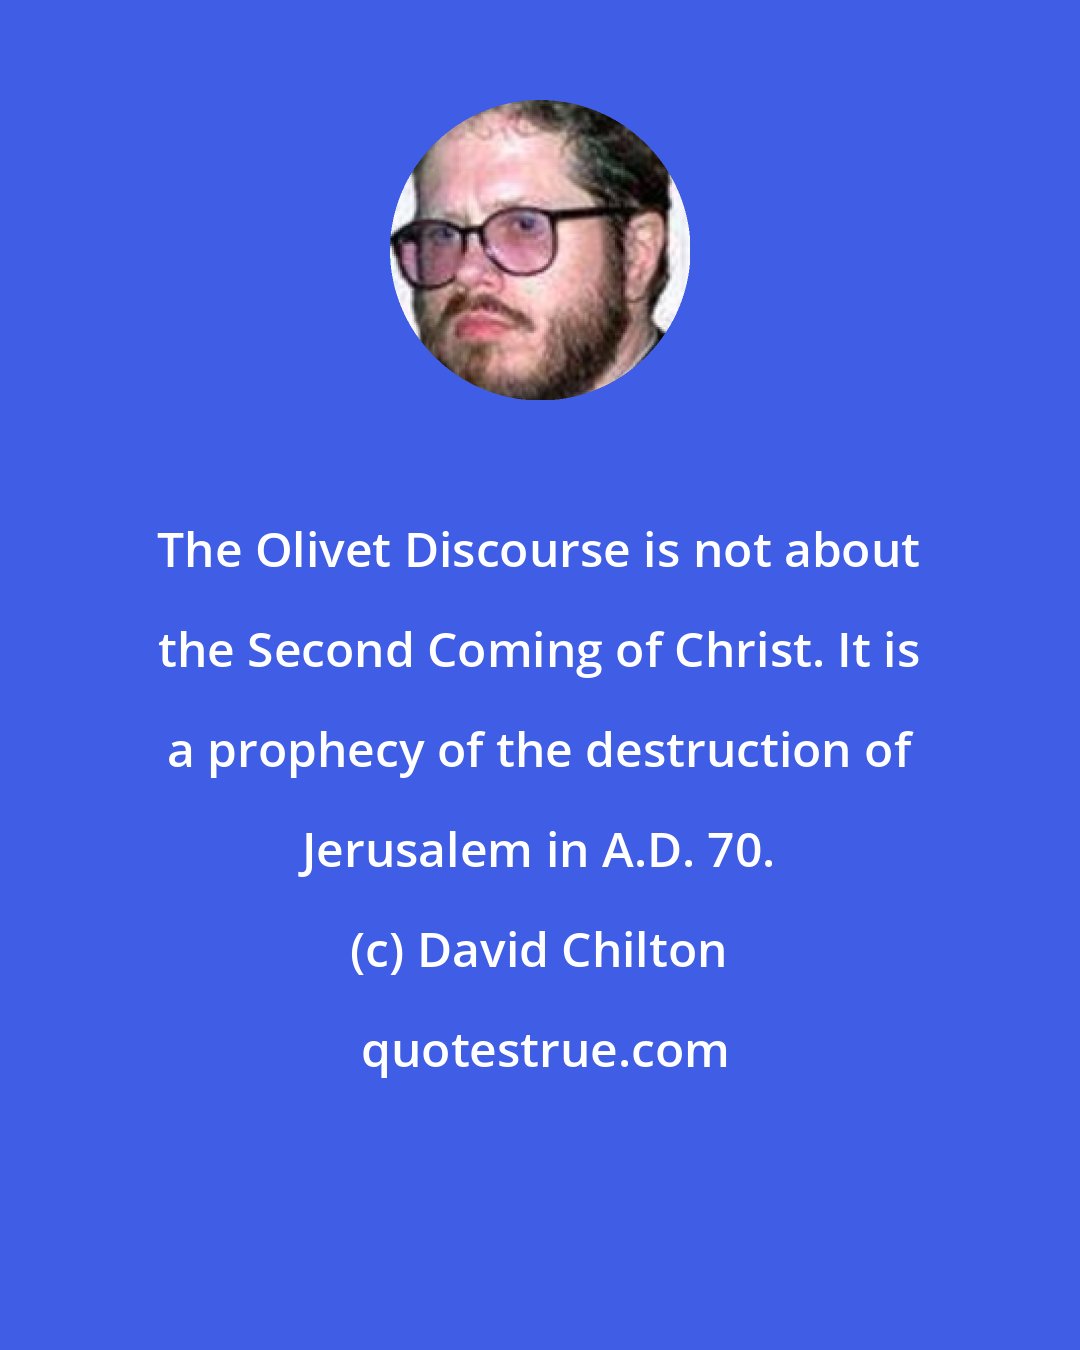 David Chilton: The Olivet Discourse is not about the Second Coming of Christ. It is a prophecy of the destruction of Jerusalem in A.D. 70.